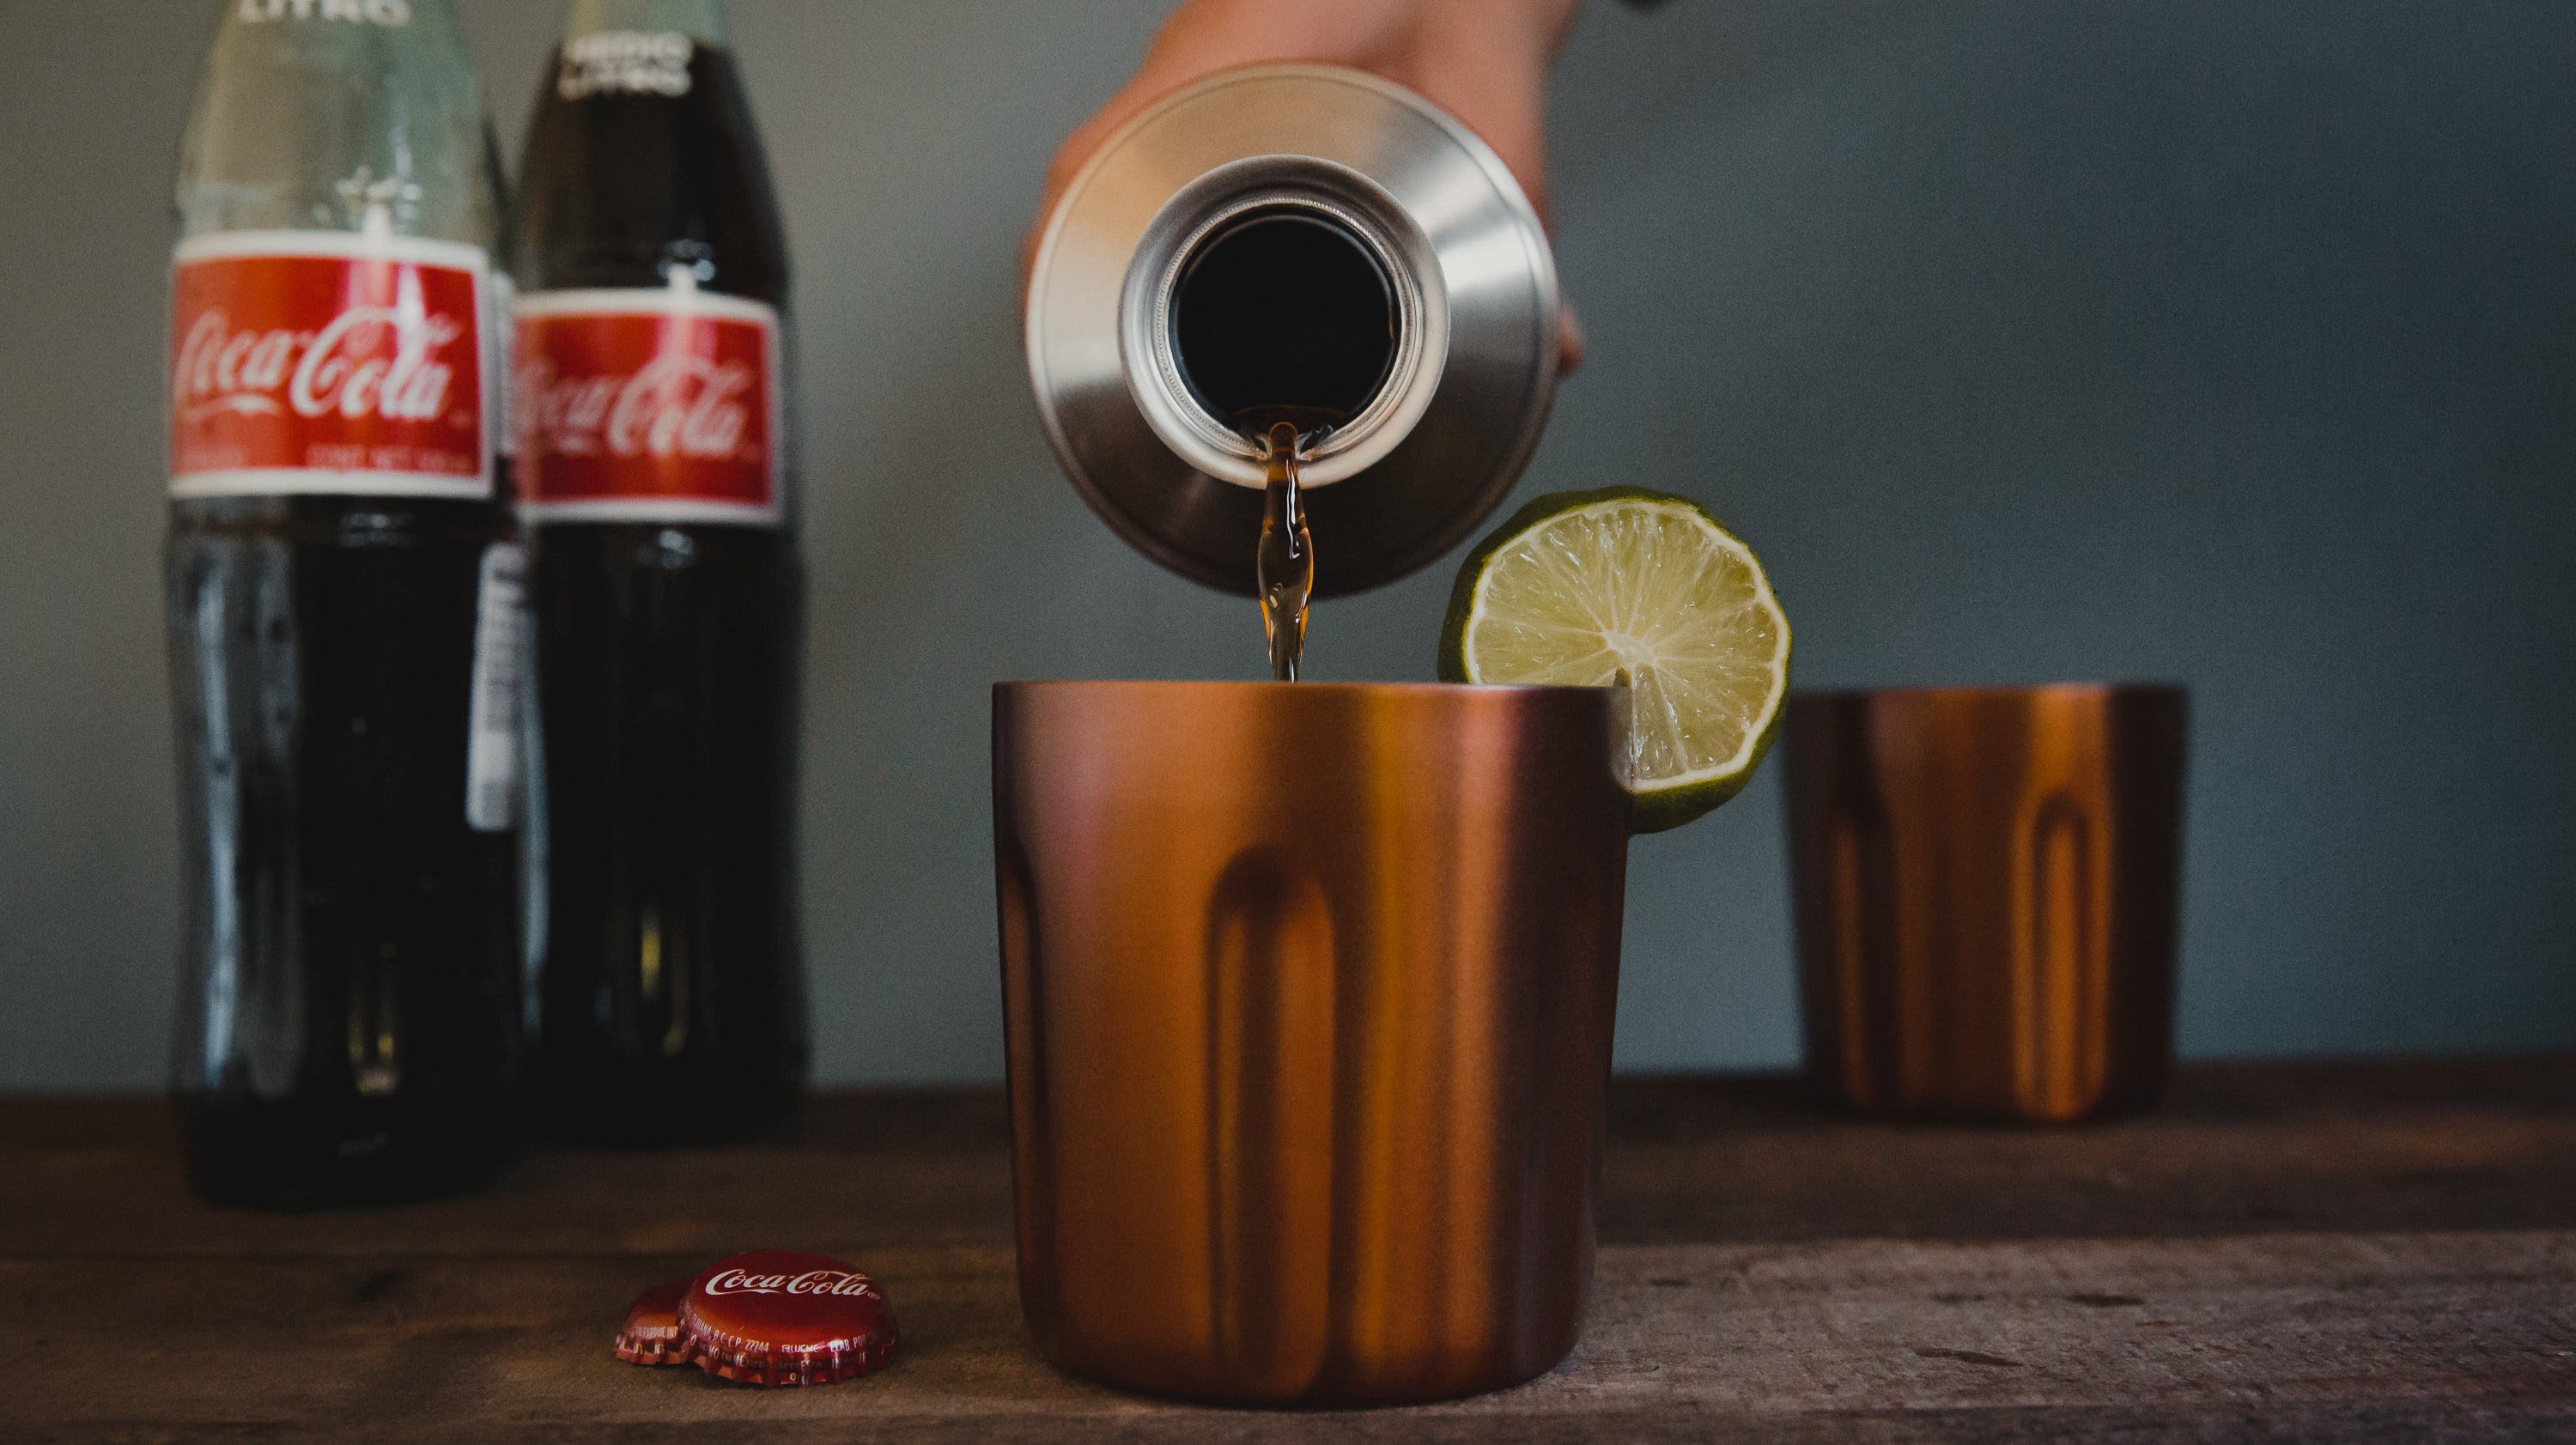 Classic Rum and Coke Recipe: How to Make It